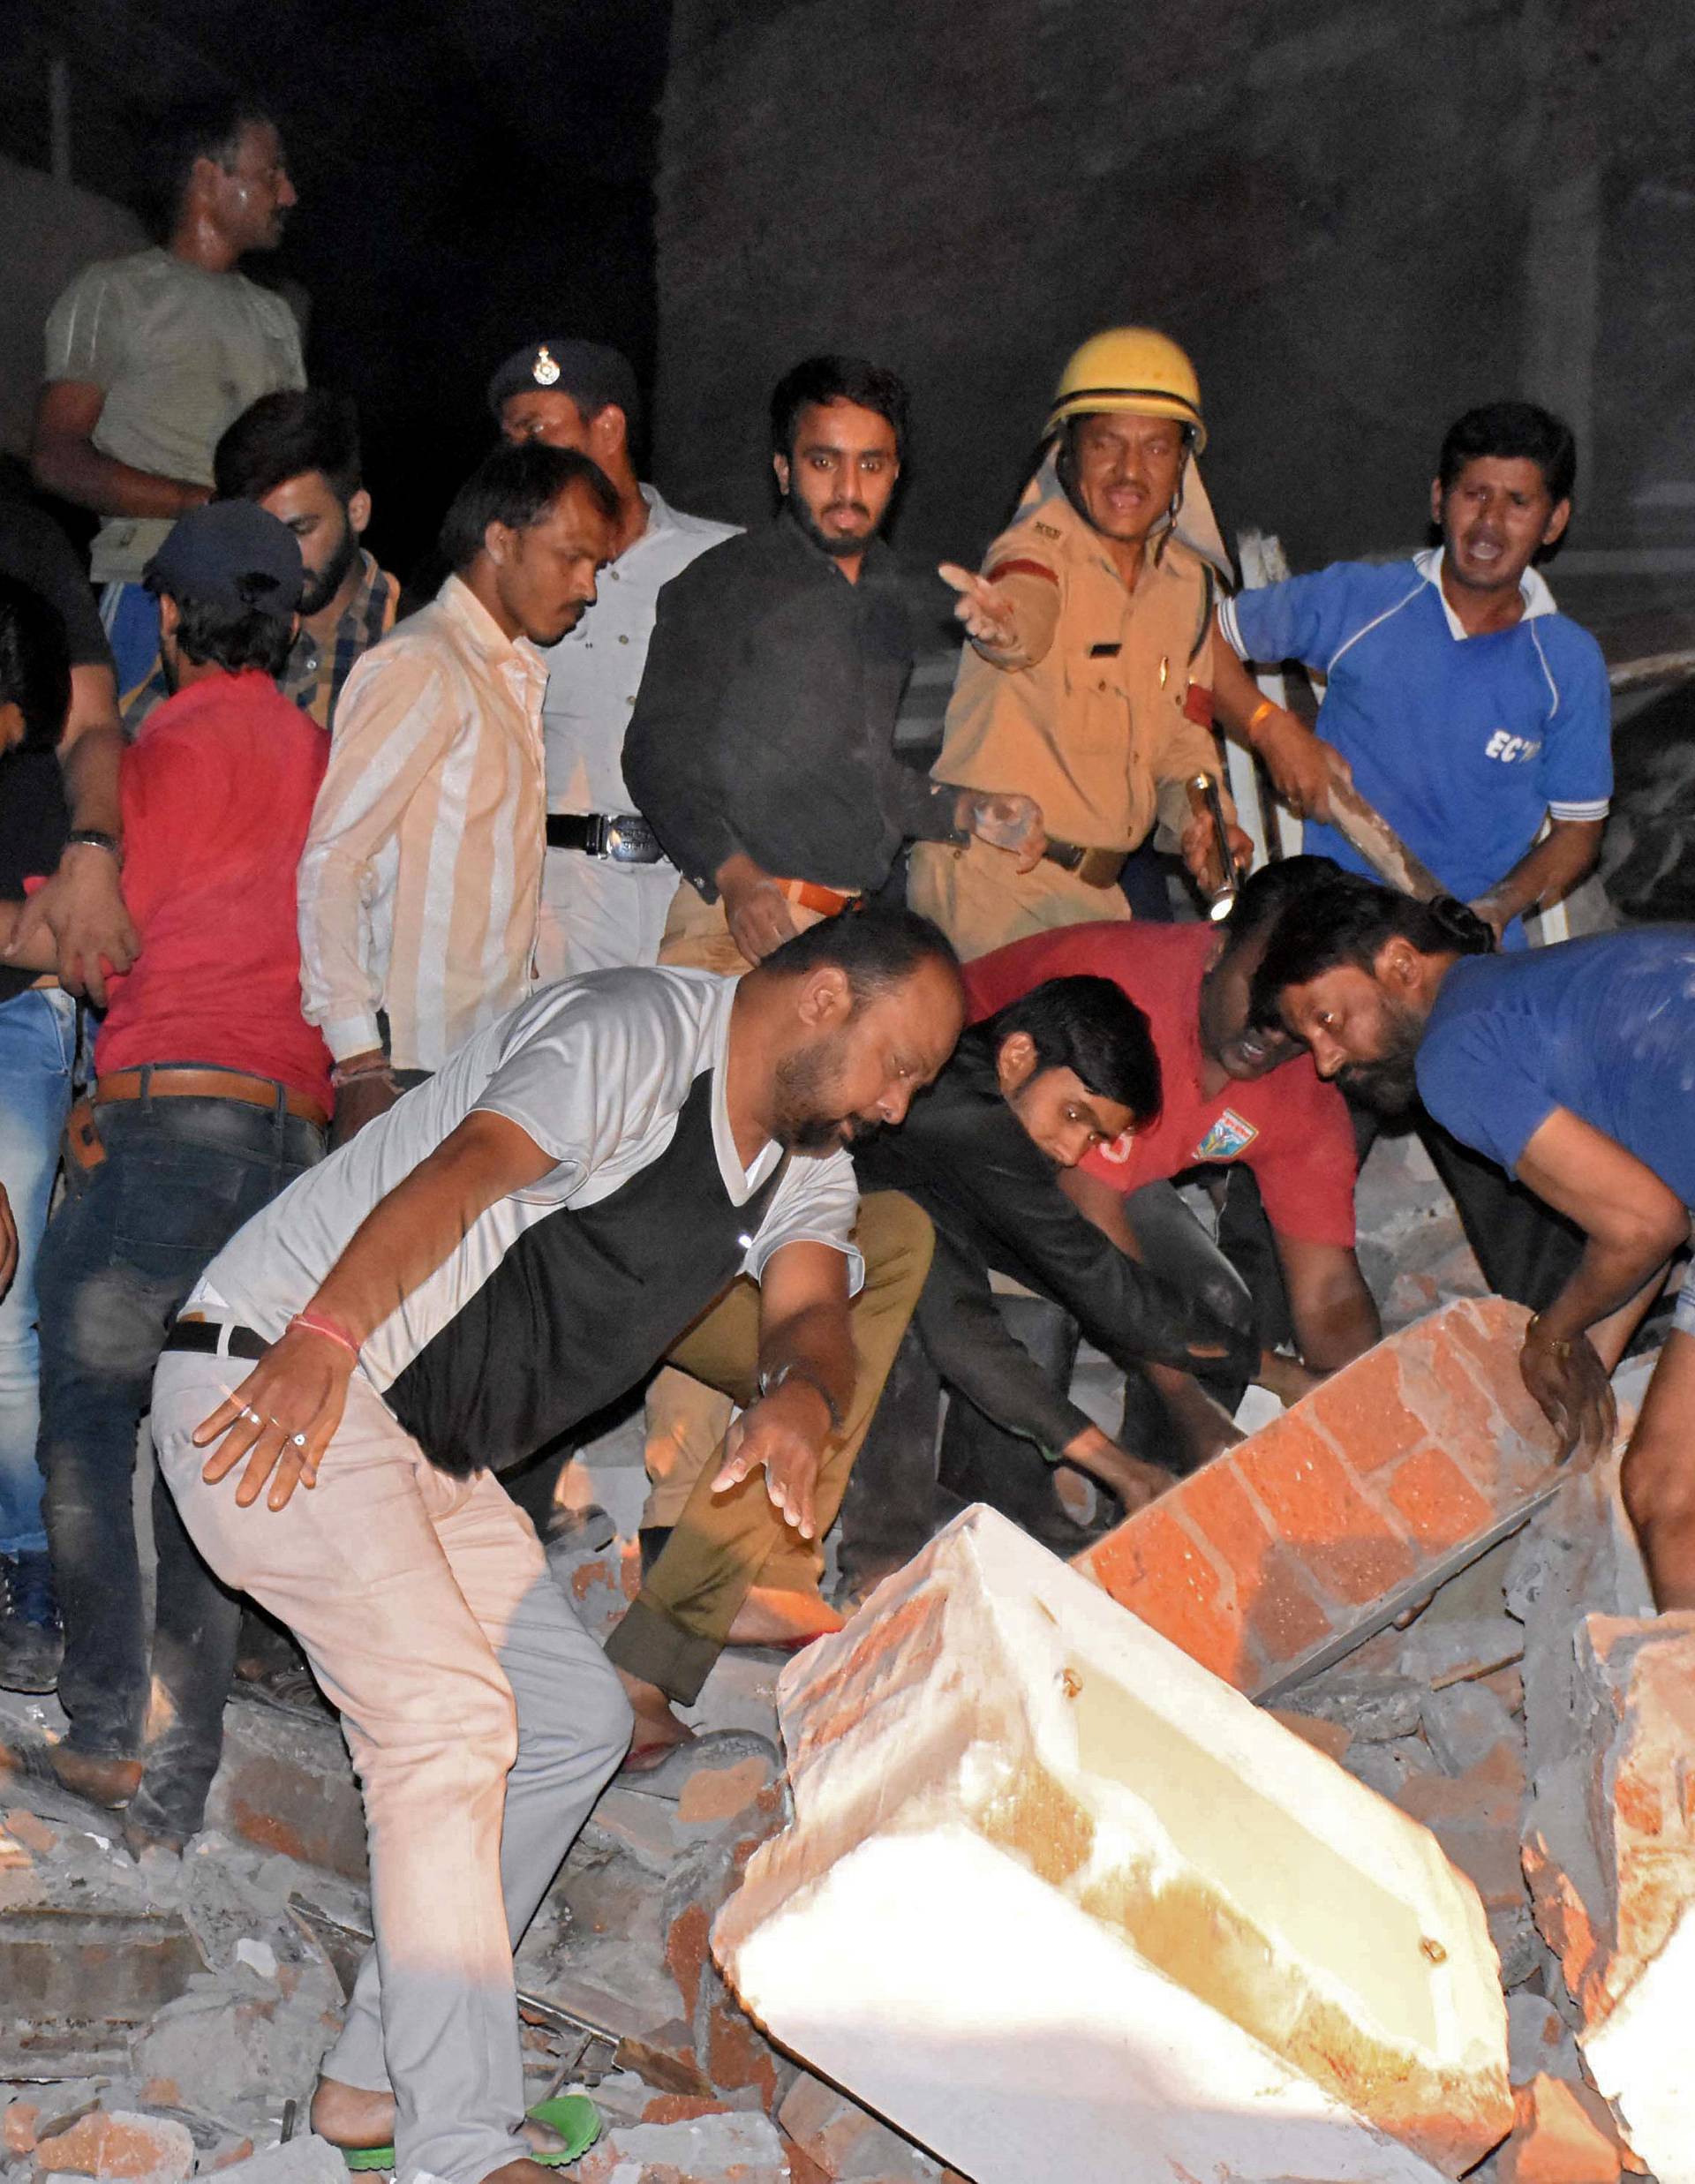 People remove the debris as they search for survivors at the site of a collapsed hotel building in Indore